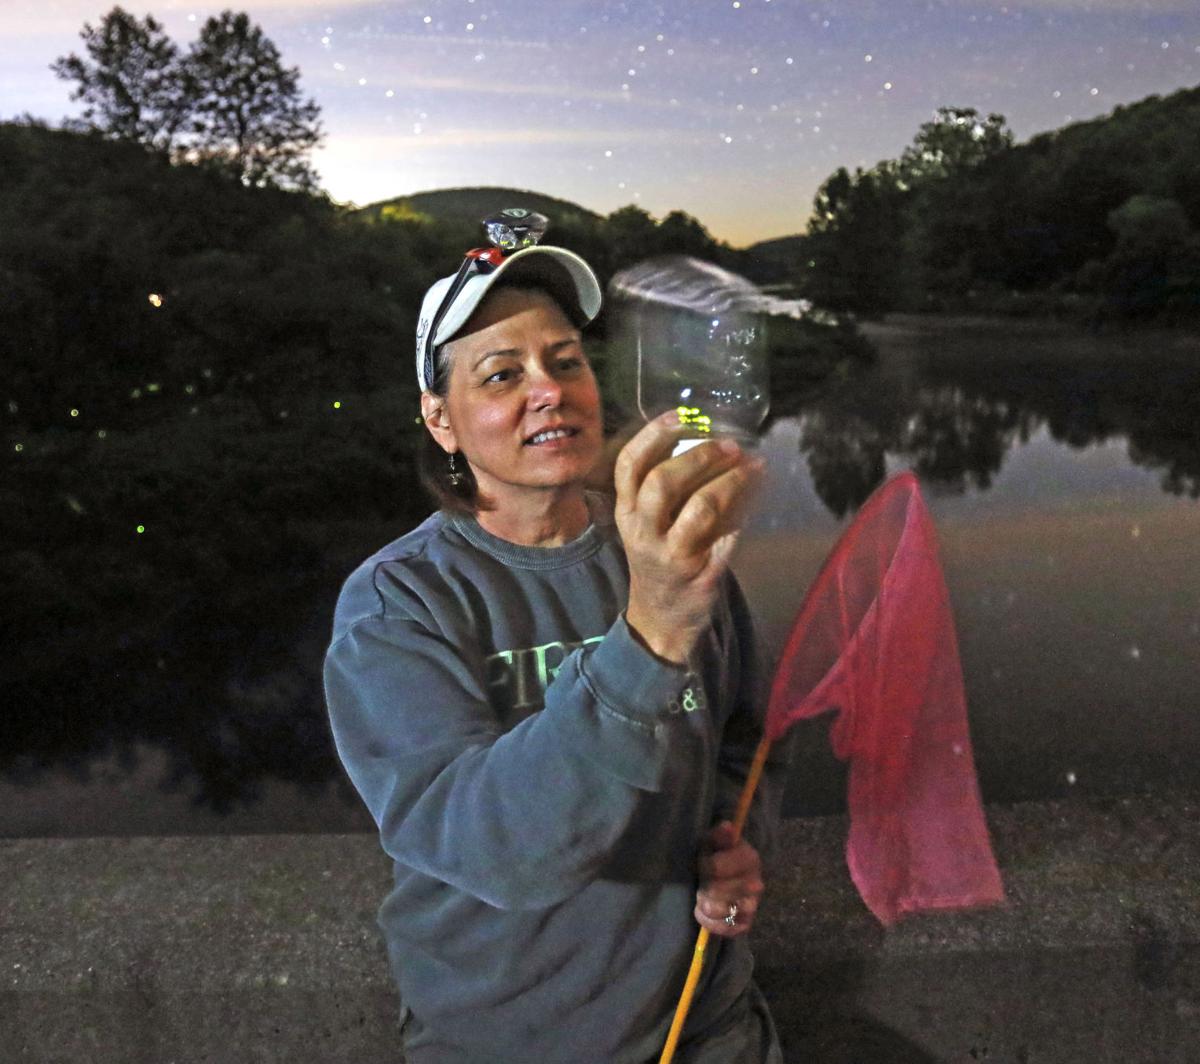 Word from the Smokies: A firefly season recap from the experts